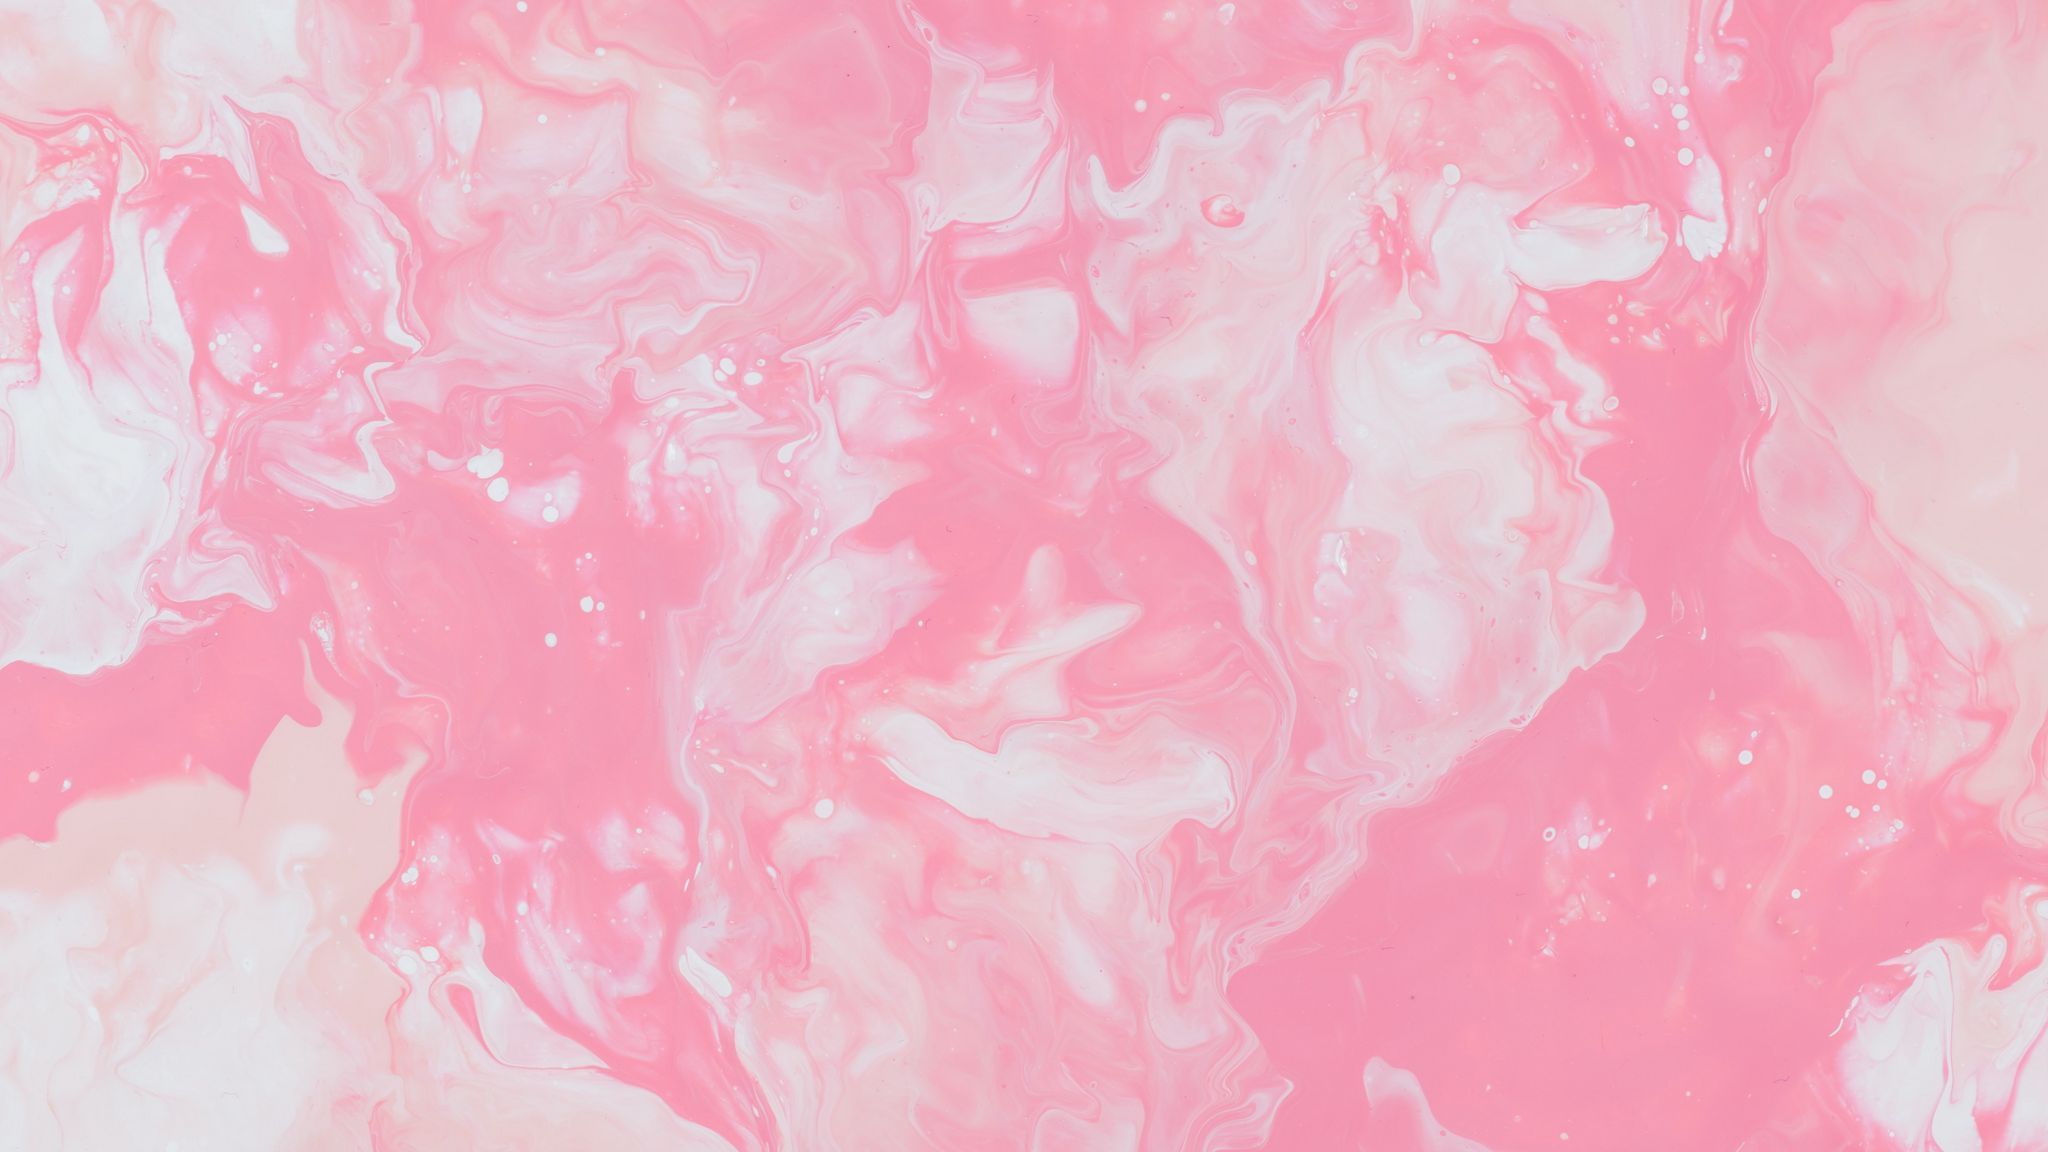 Download wallpaper 2048x1152 stains, pink, paint ultrawide monitor HD background